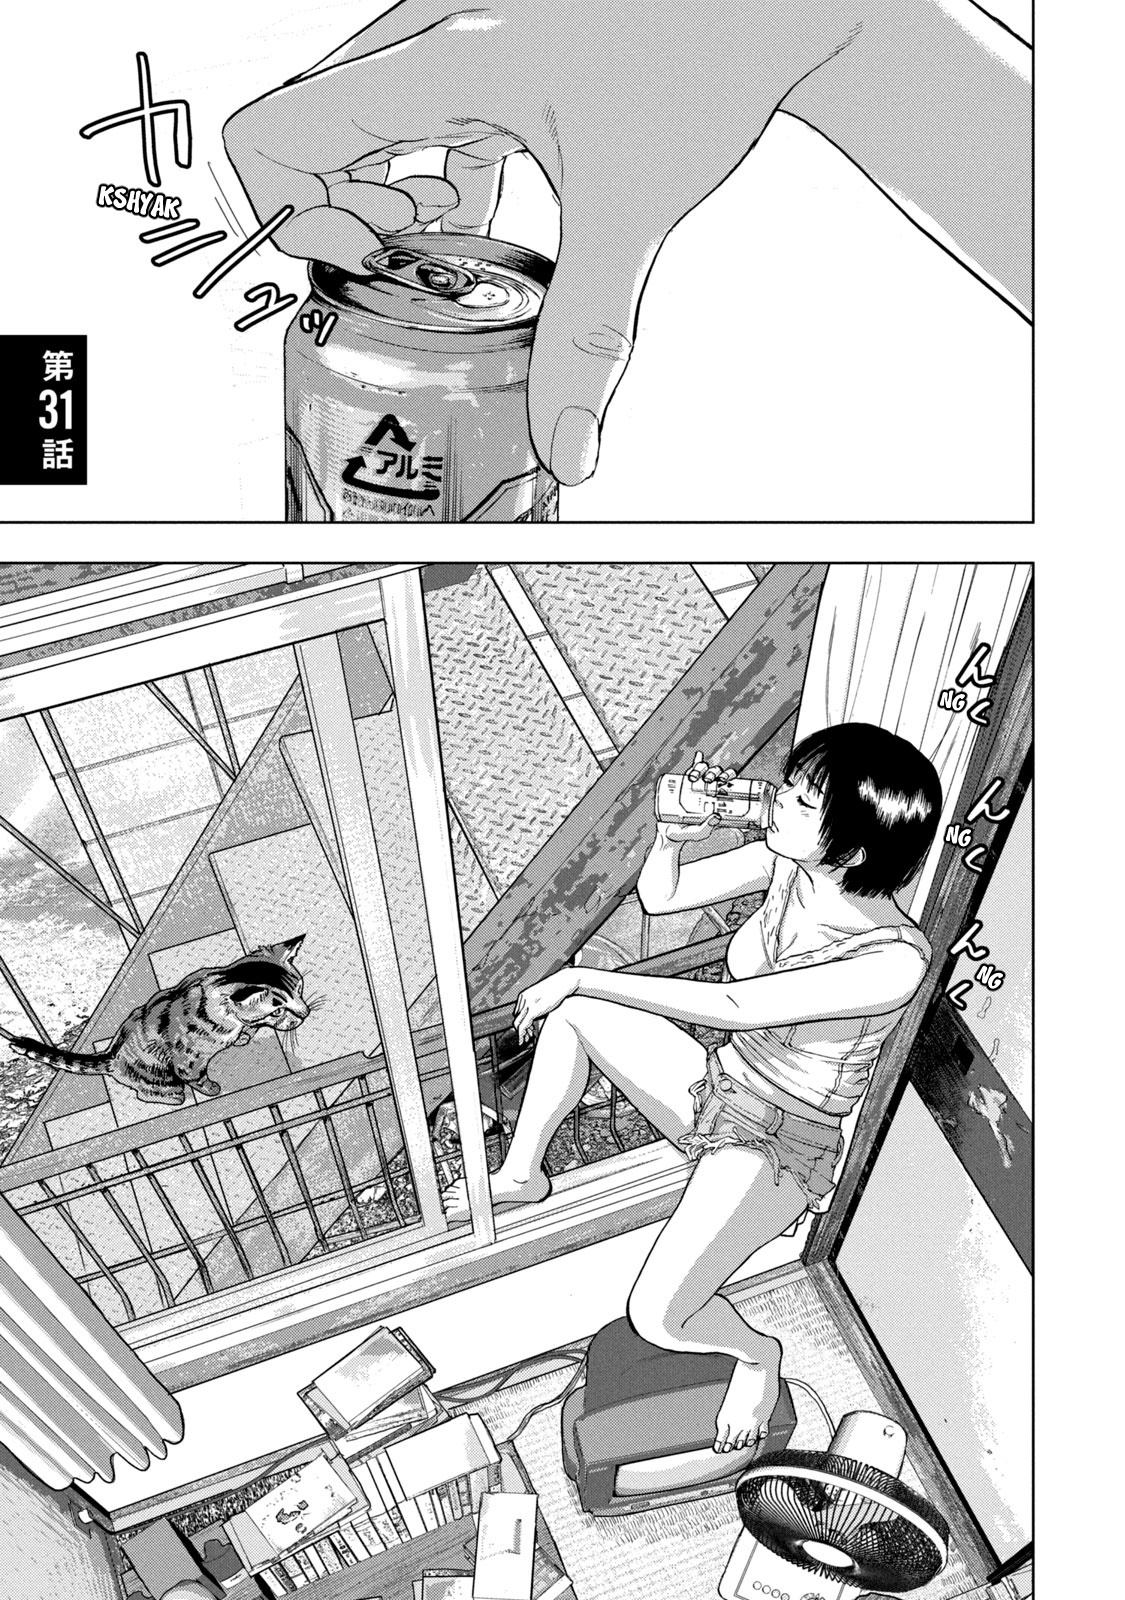 Under Ninja Vol.4 Chapter 31: The Elementary School Kids Saw It! - Picture 1